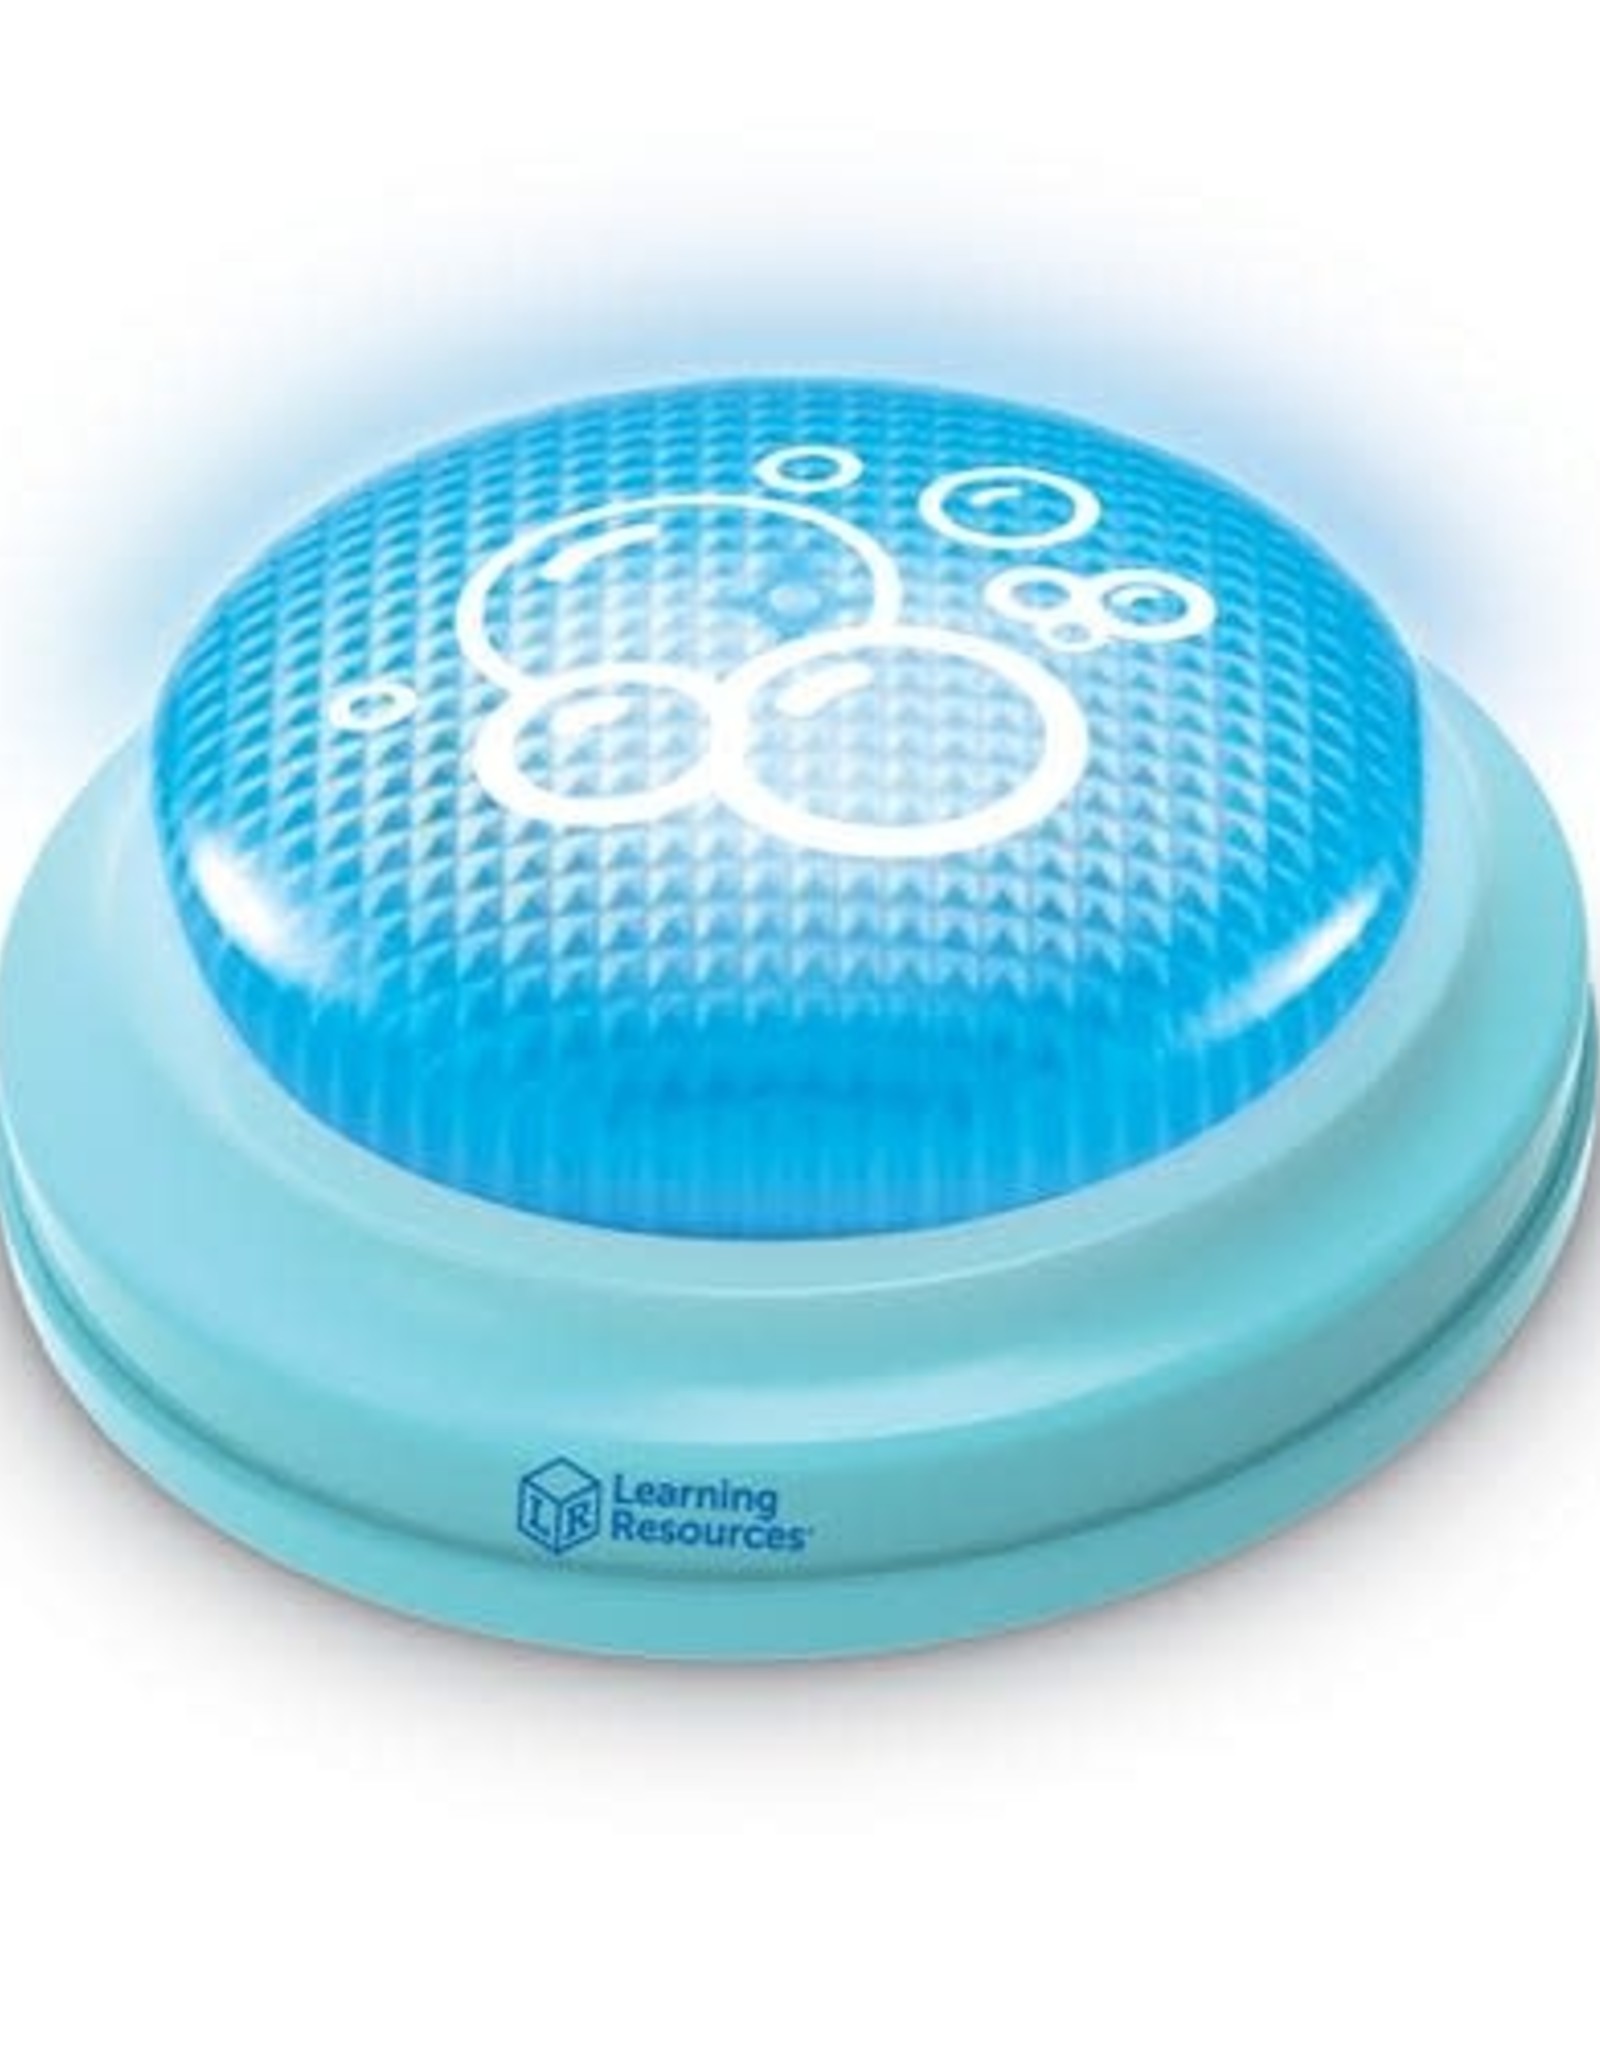 Learning Resources 20 Second Handwashing Timer